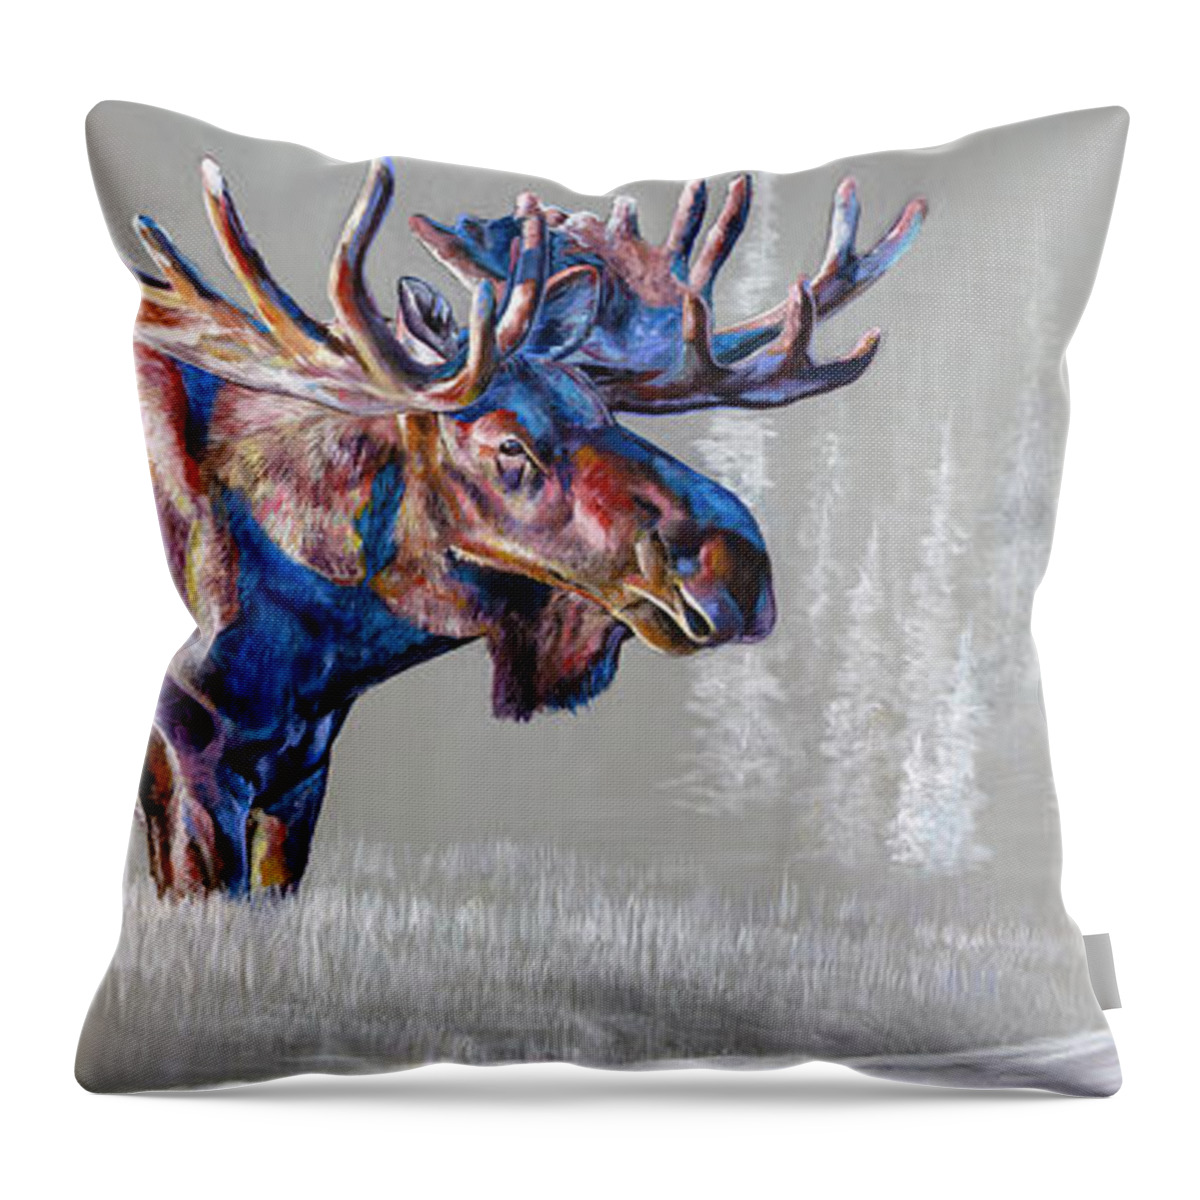 Moose Throw Pillow featuring the painting Mystic by Averi Iris